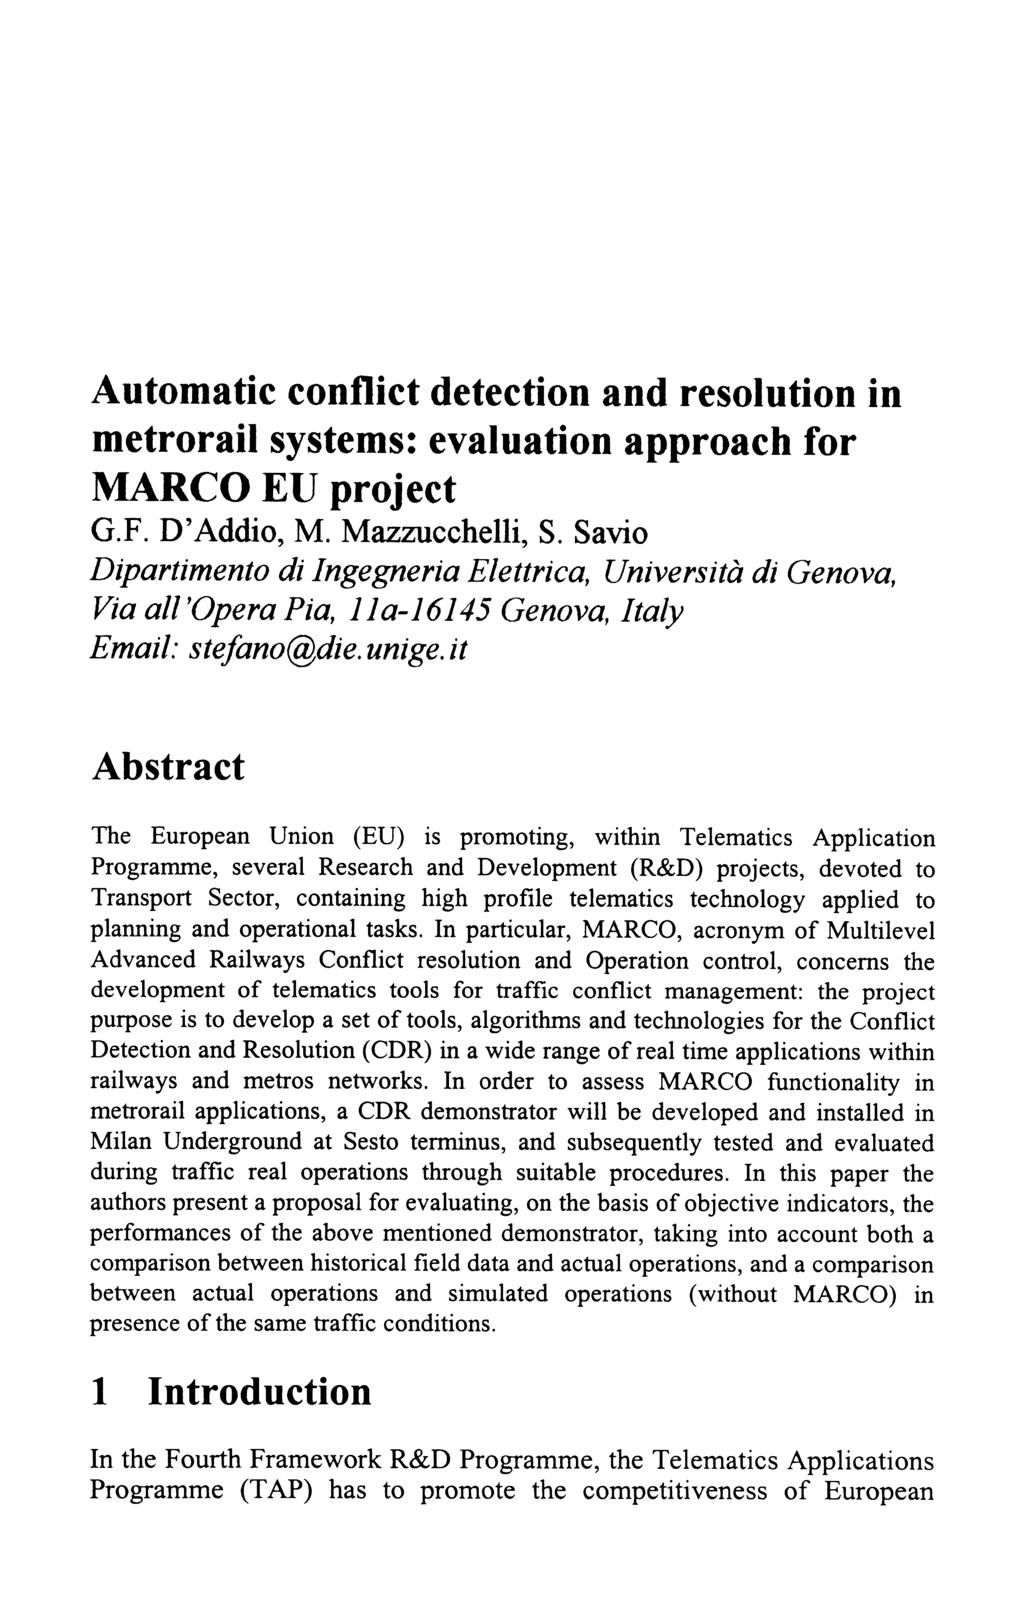 Automatic conflict detection and reolution in metrorail ytem: evaluation approach for MARCO EU project G.F. D'Addio, M. Mazzucchelli, S.